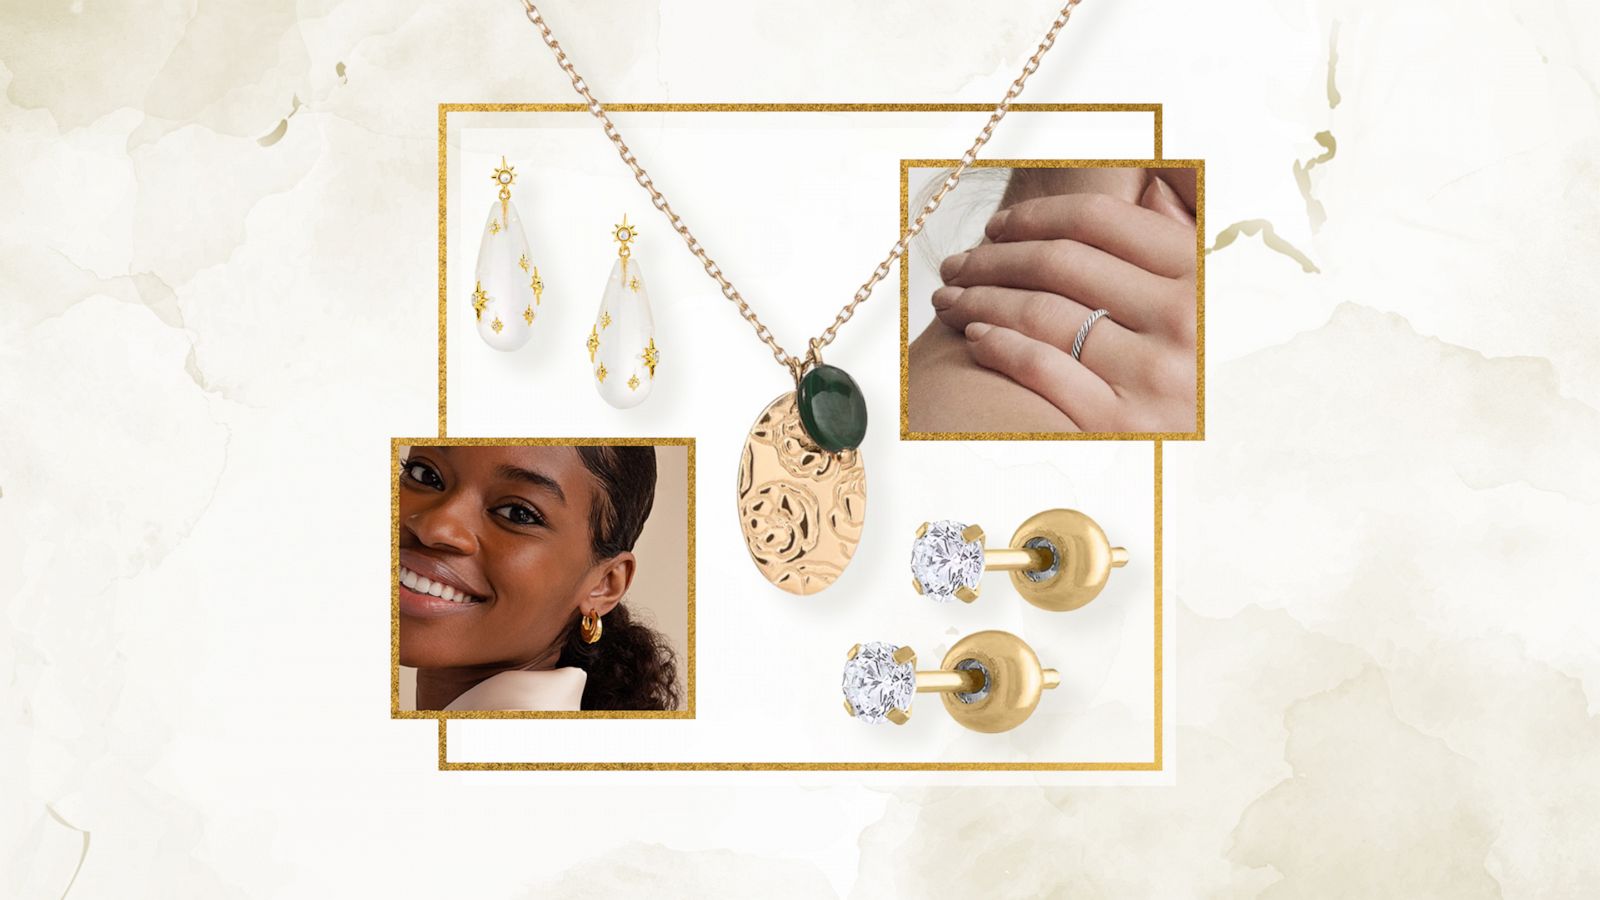 Shares the Must-Have Jewelry Trends for 2023